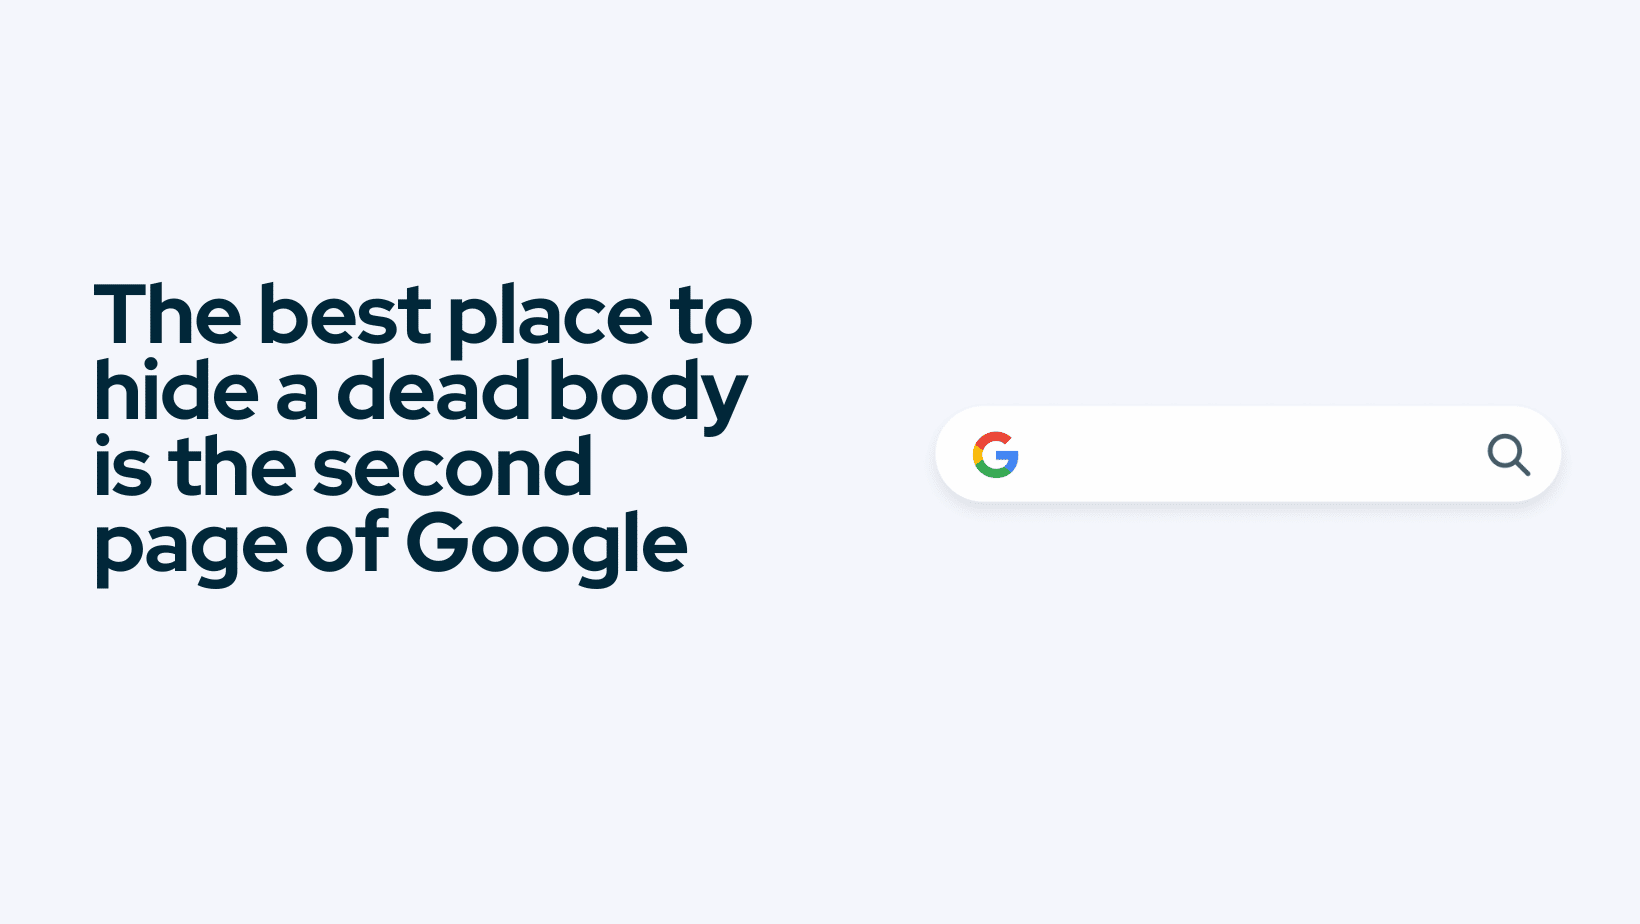 The best place to hide a dead body is the second page of Google